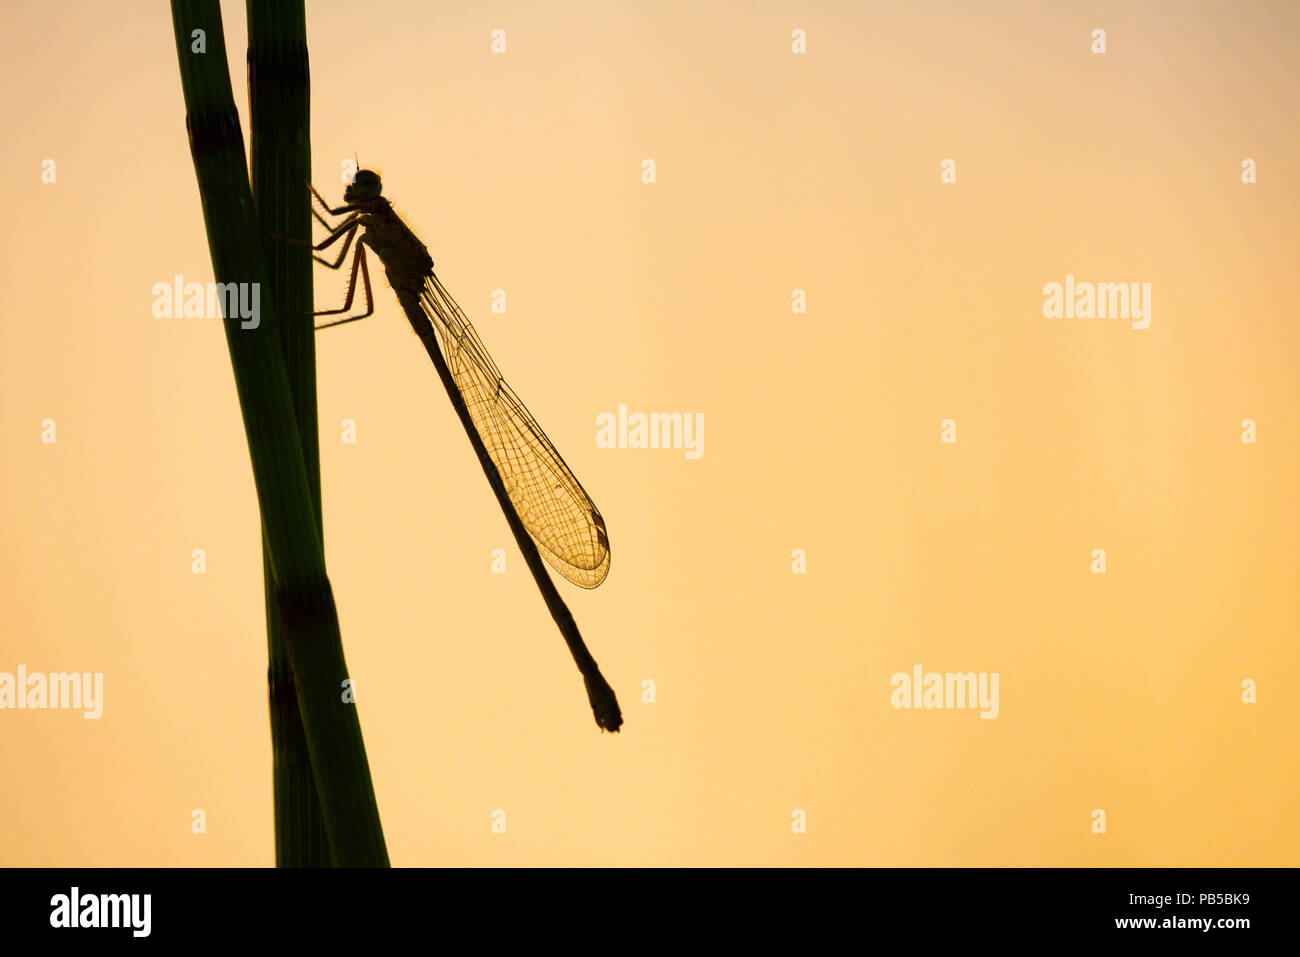 A Common Blue Damselfly (Enallagma cyathigerum) on a reed in silhouette in the Mendip Hills, Somerset, England. Stock Photo